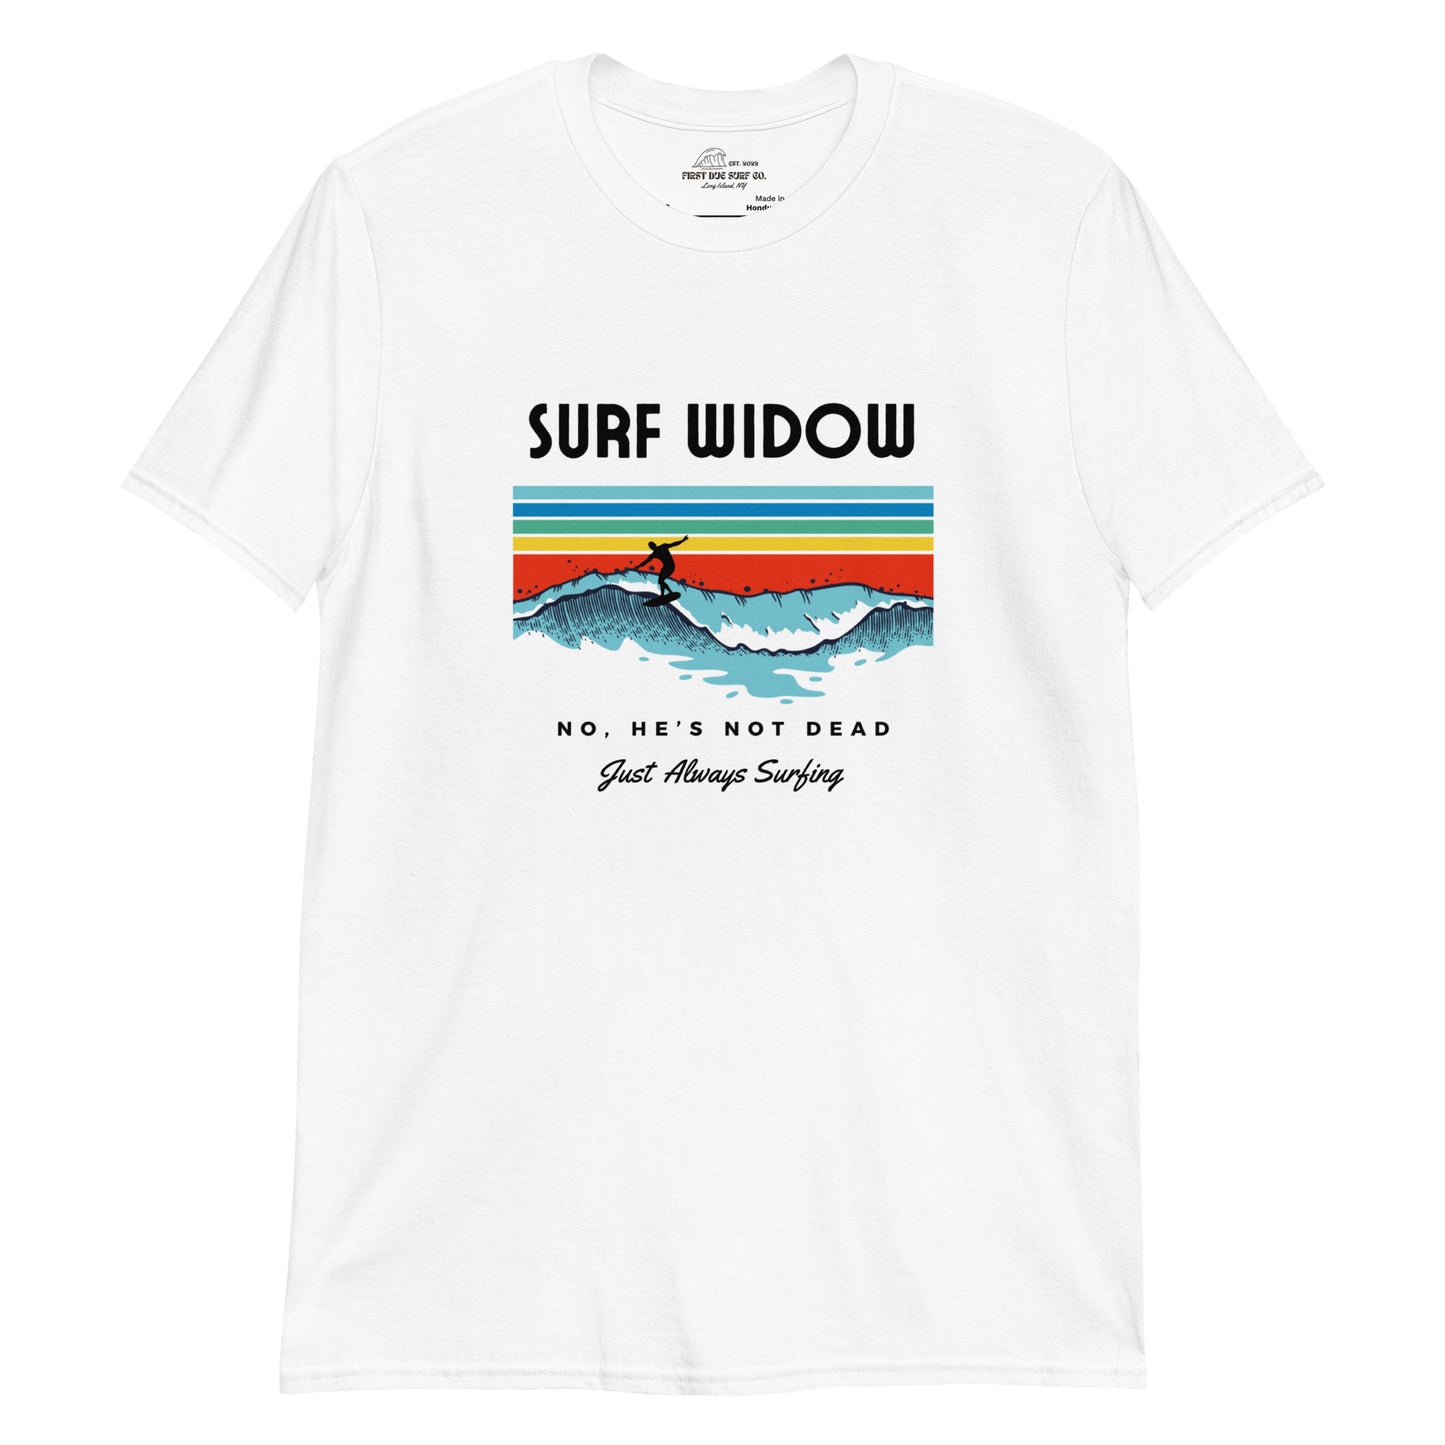 Surf Widow Woman's T-shirt - Front Only